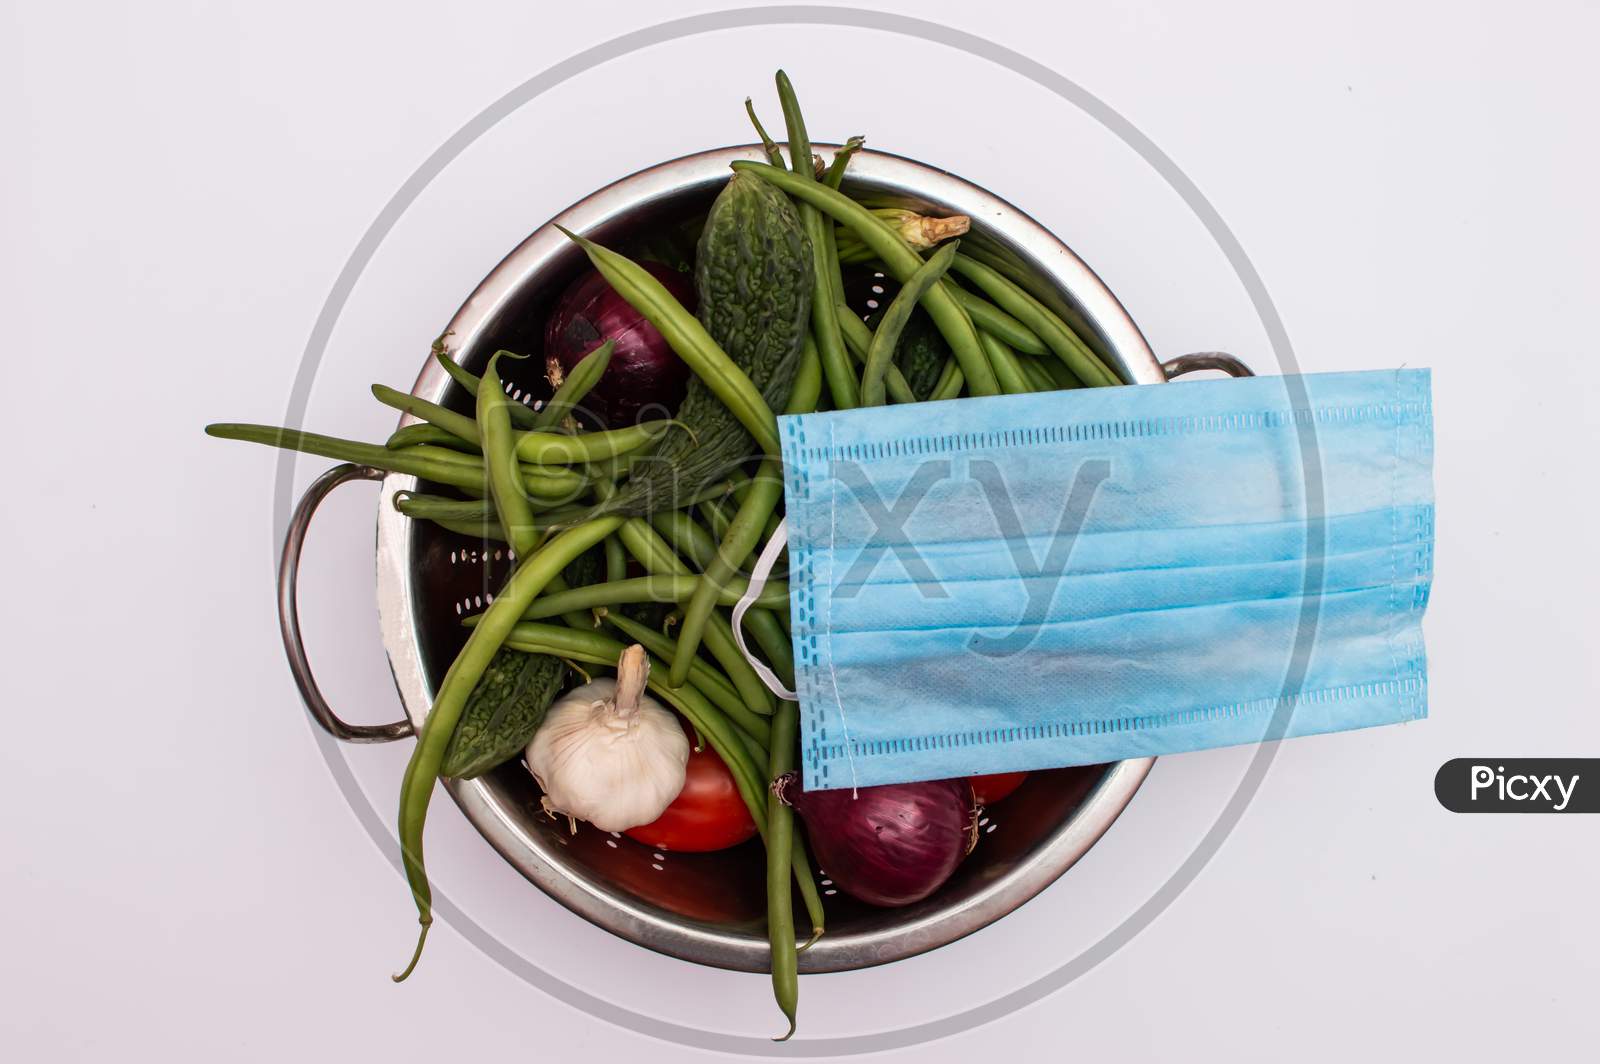 Mask placed on a vegetable basket on white background